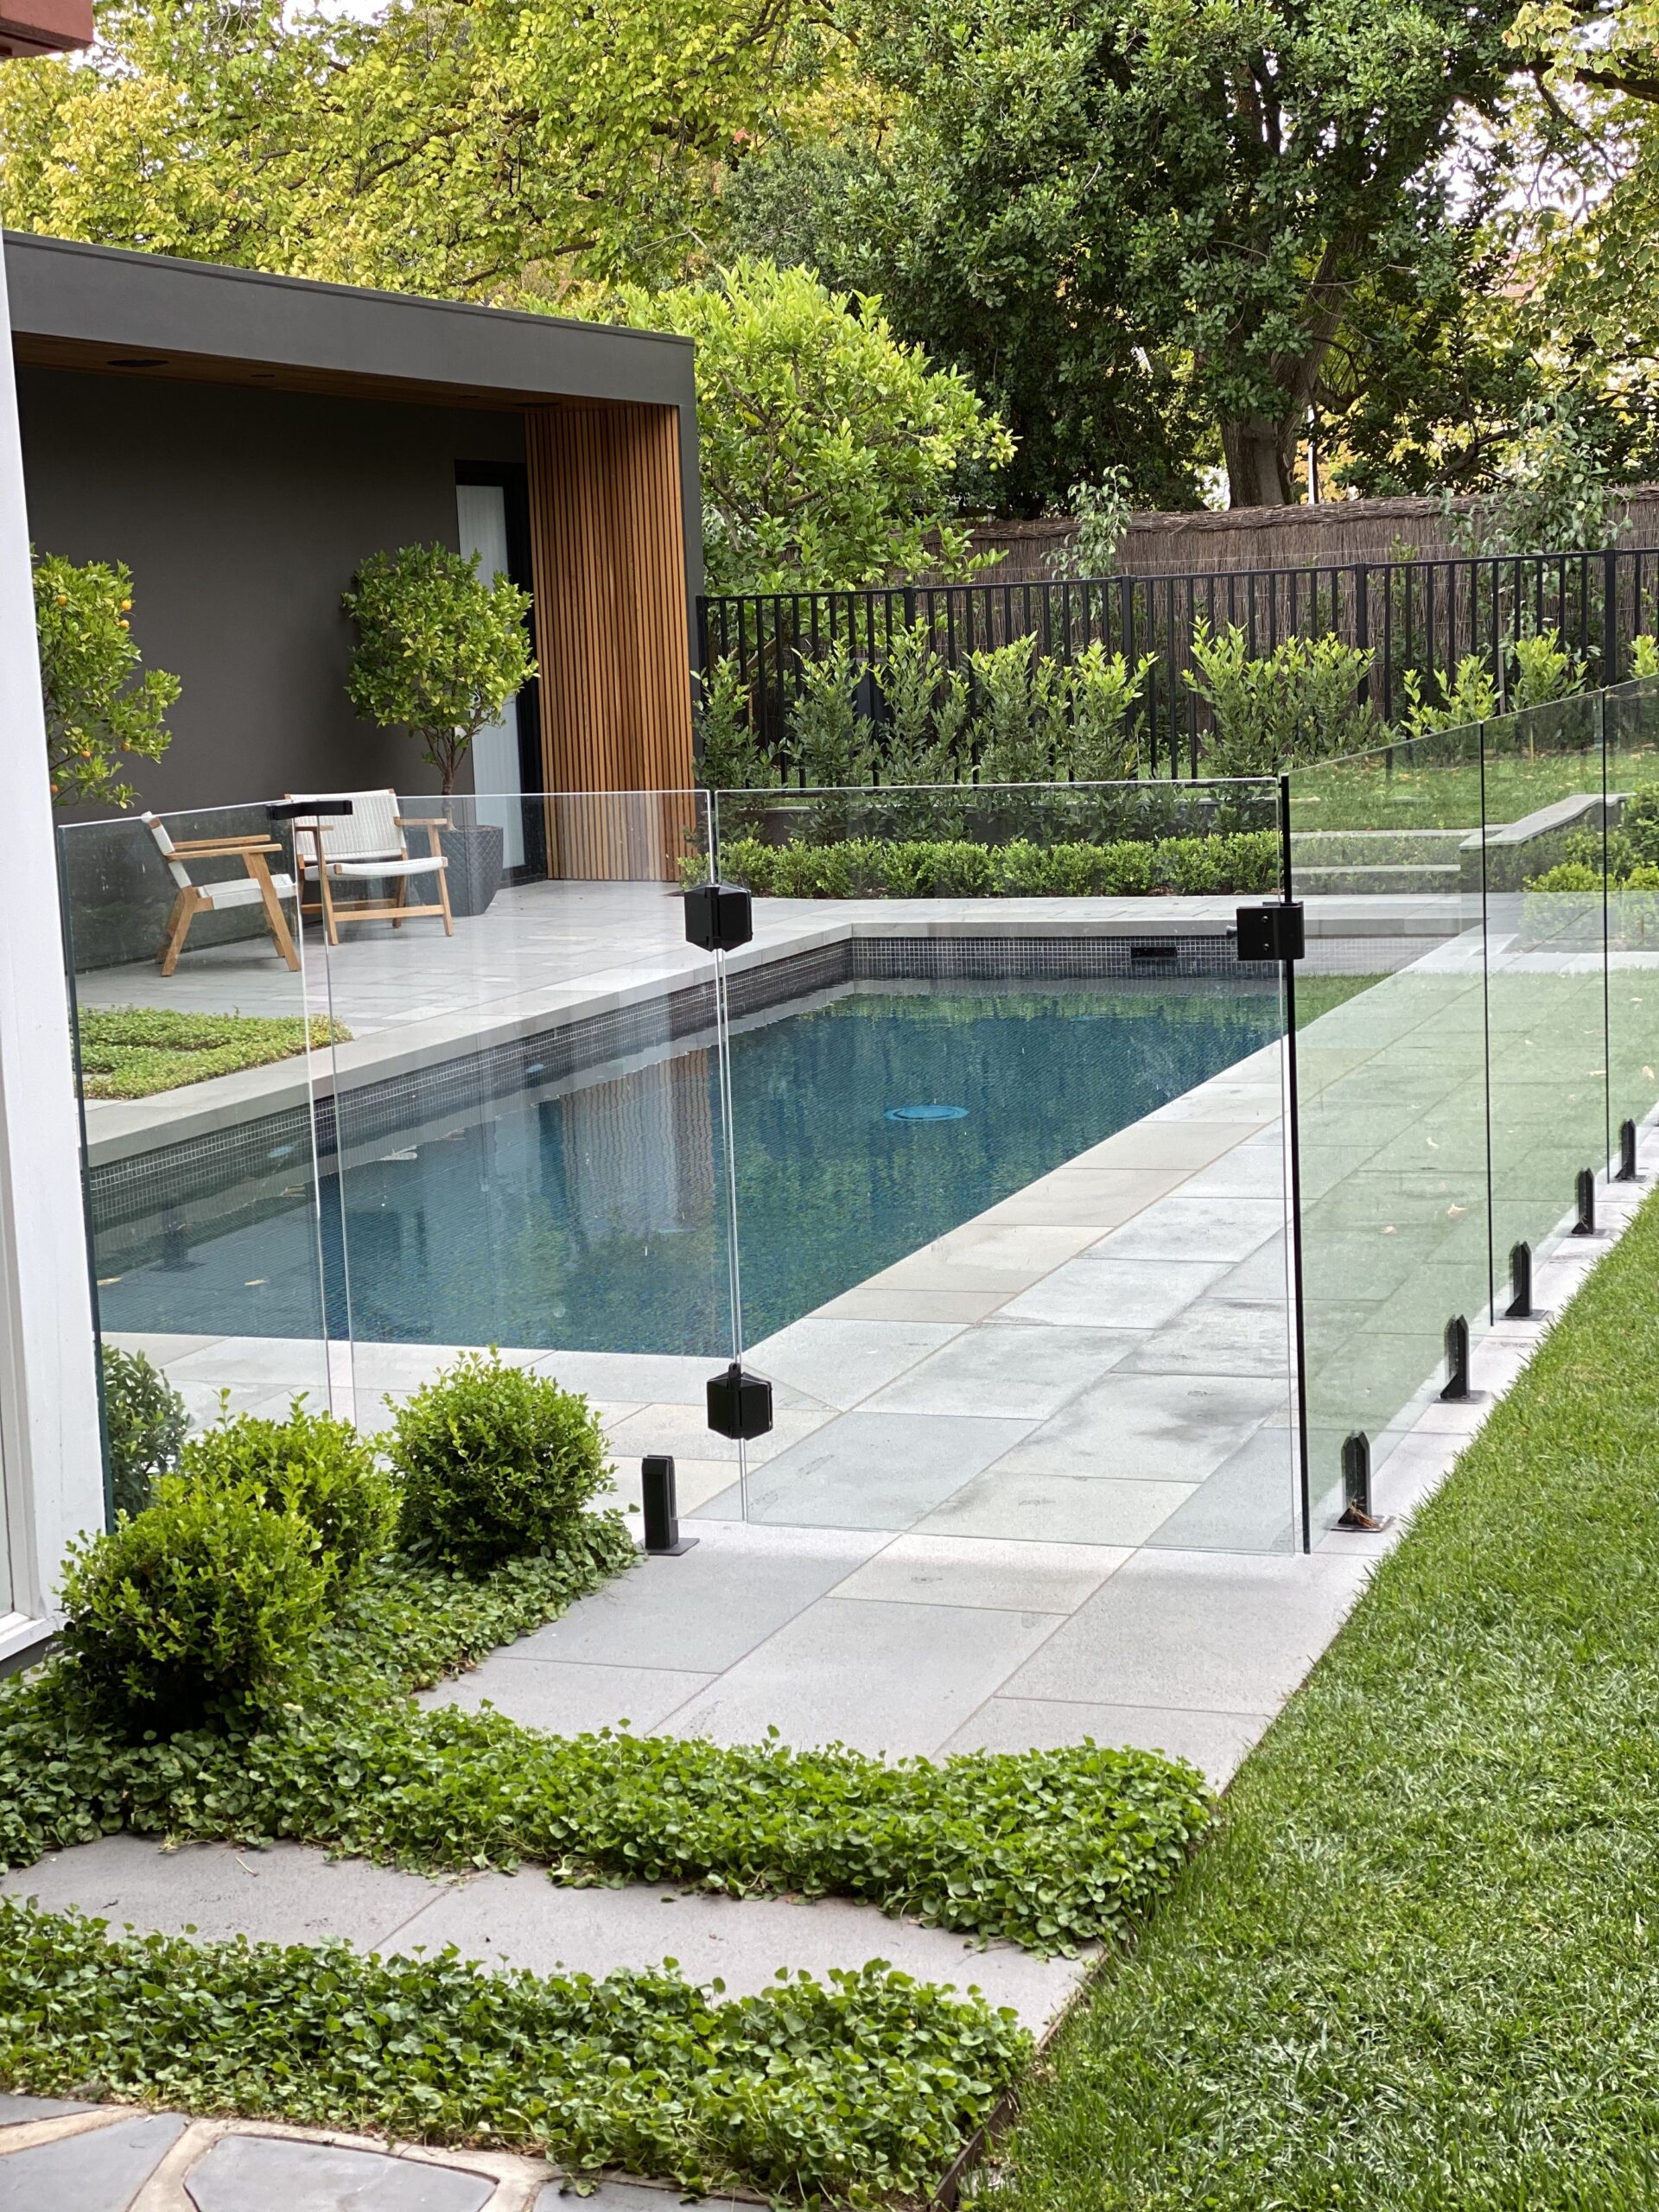 Transform Your Pool Area with Stunning Landscaping Design